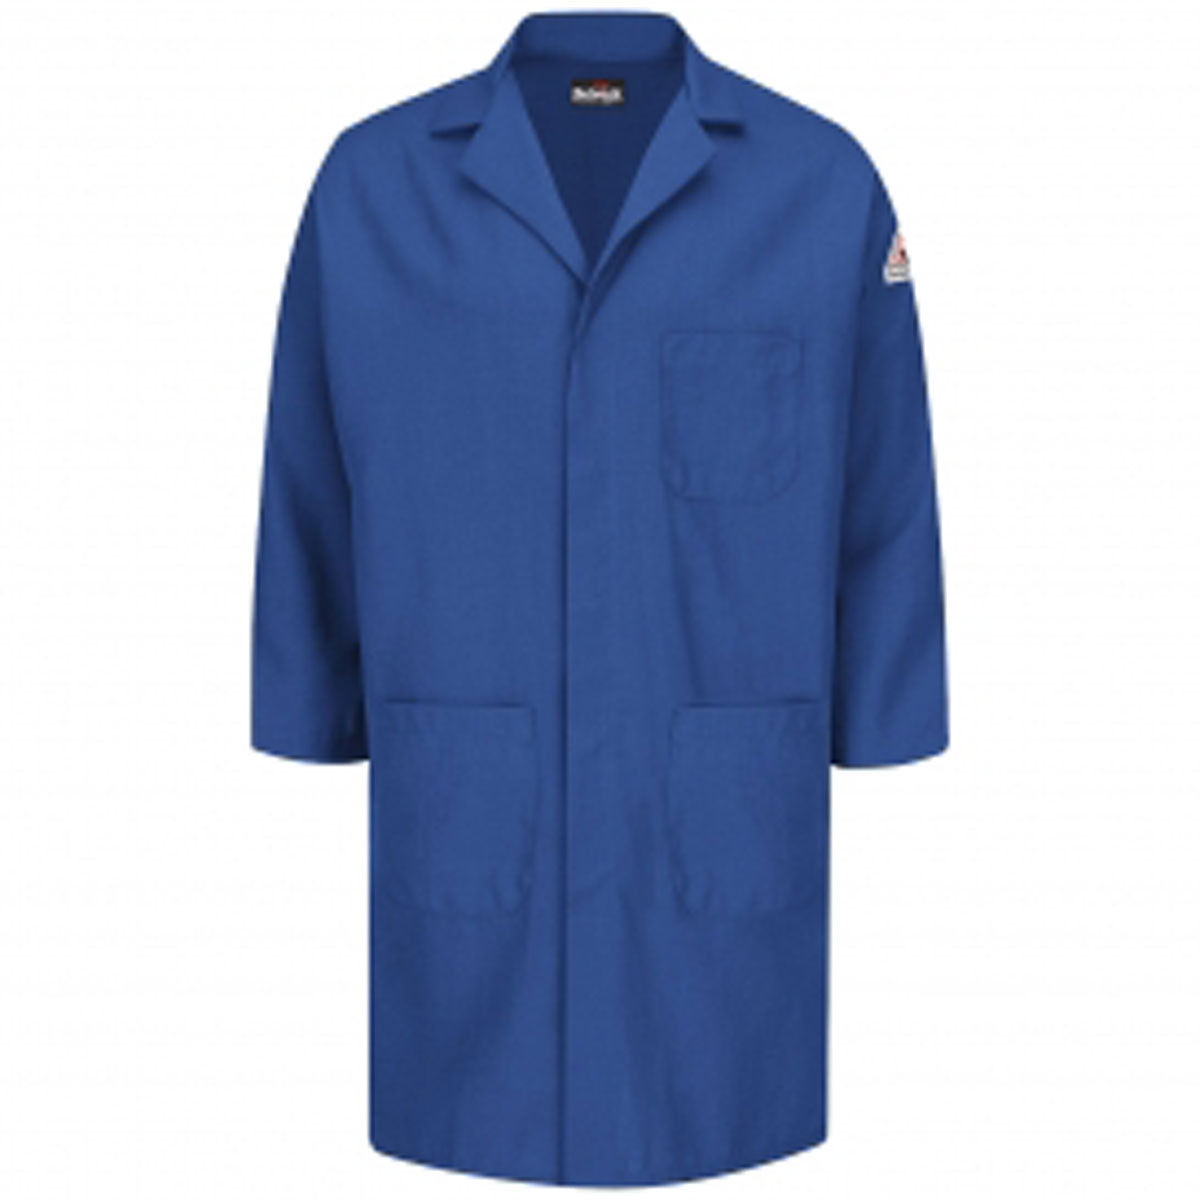 What is the arc rating of the Bulwark KNL6RB lab coat?